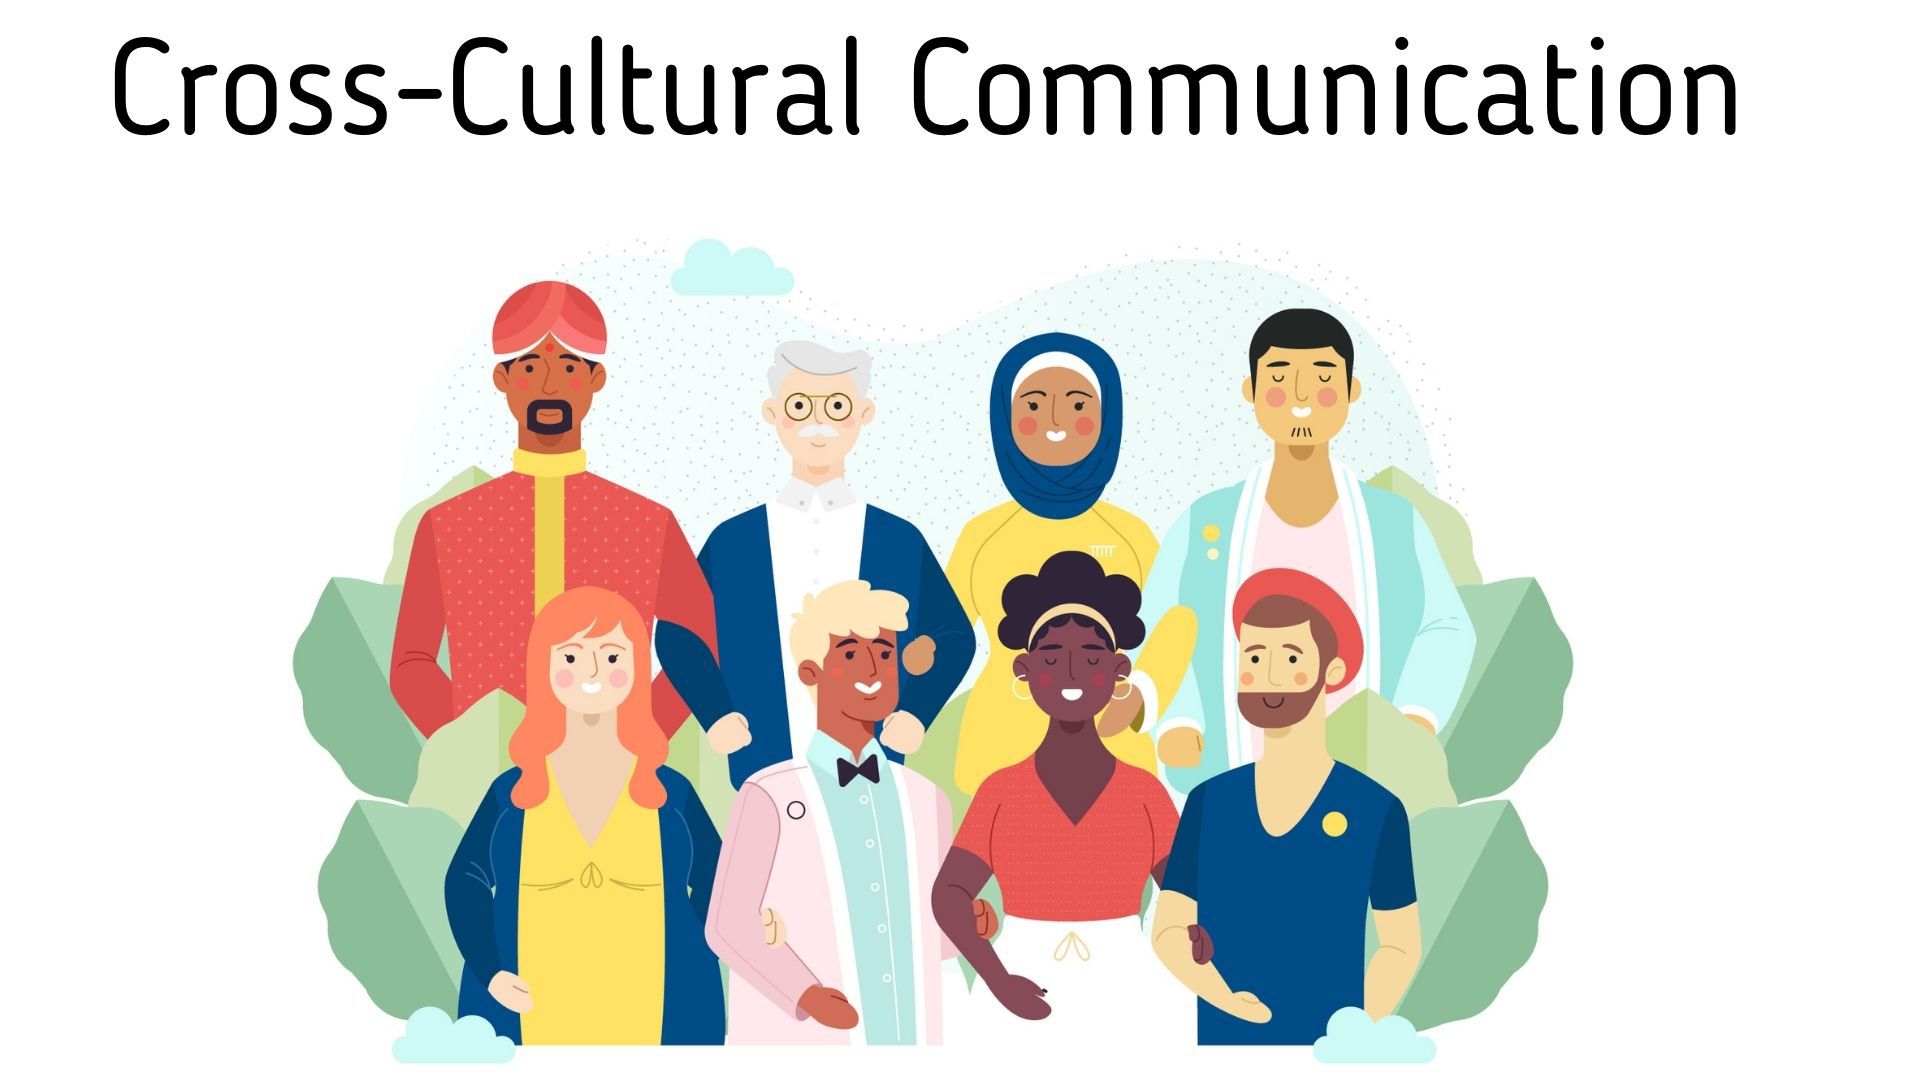 Why are stereotypes important in communication?